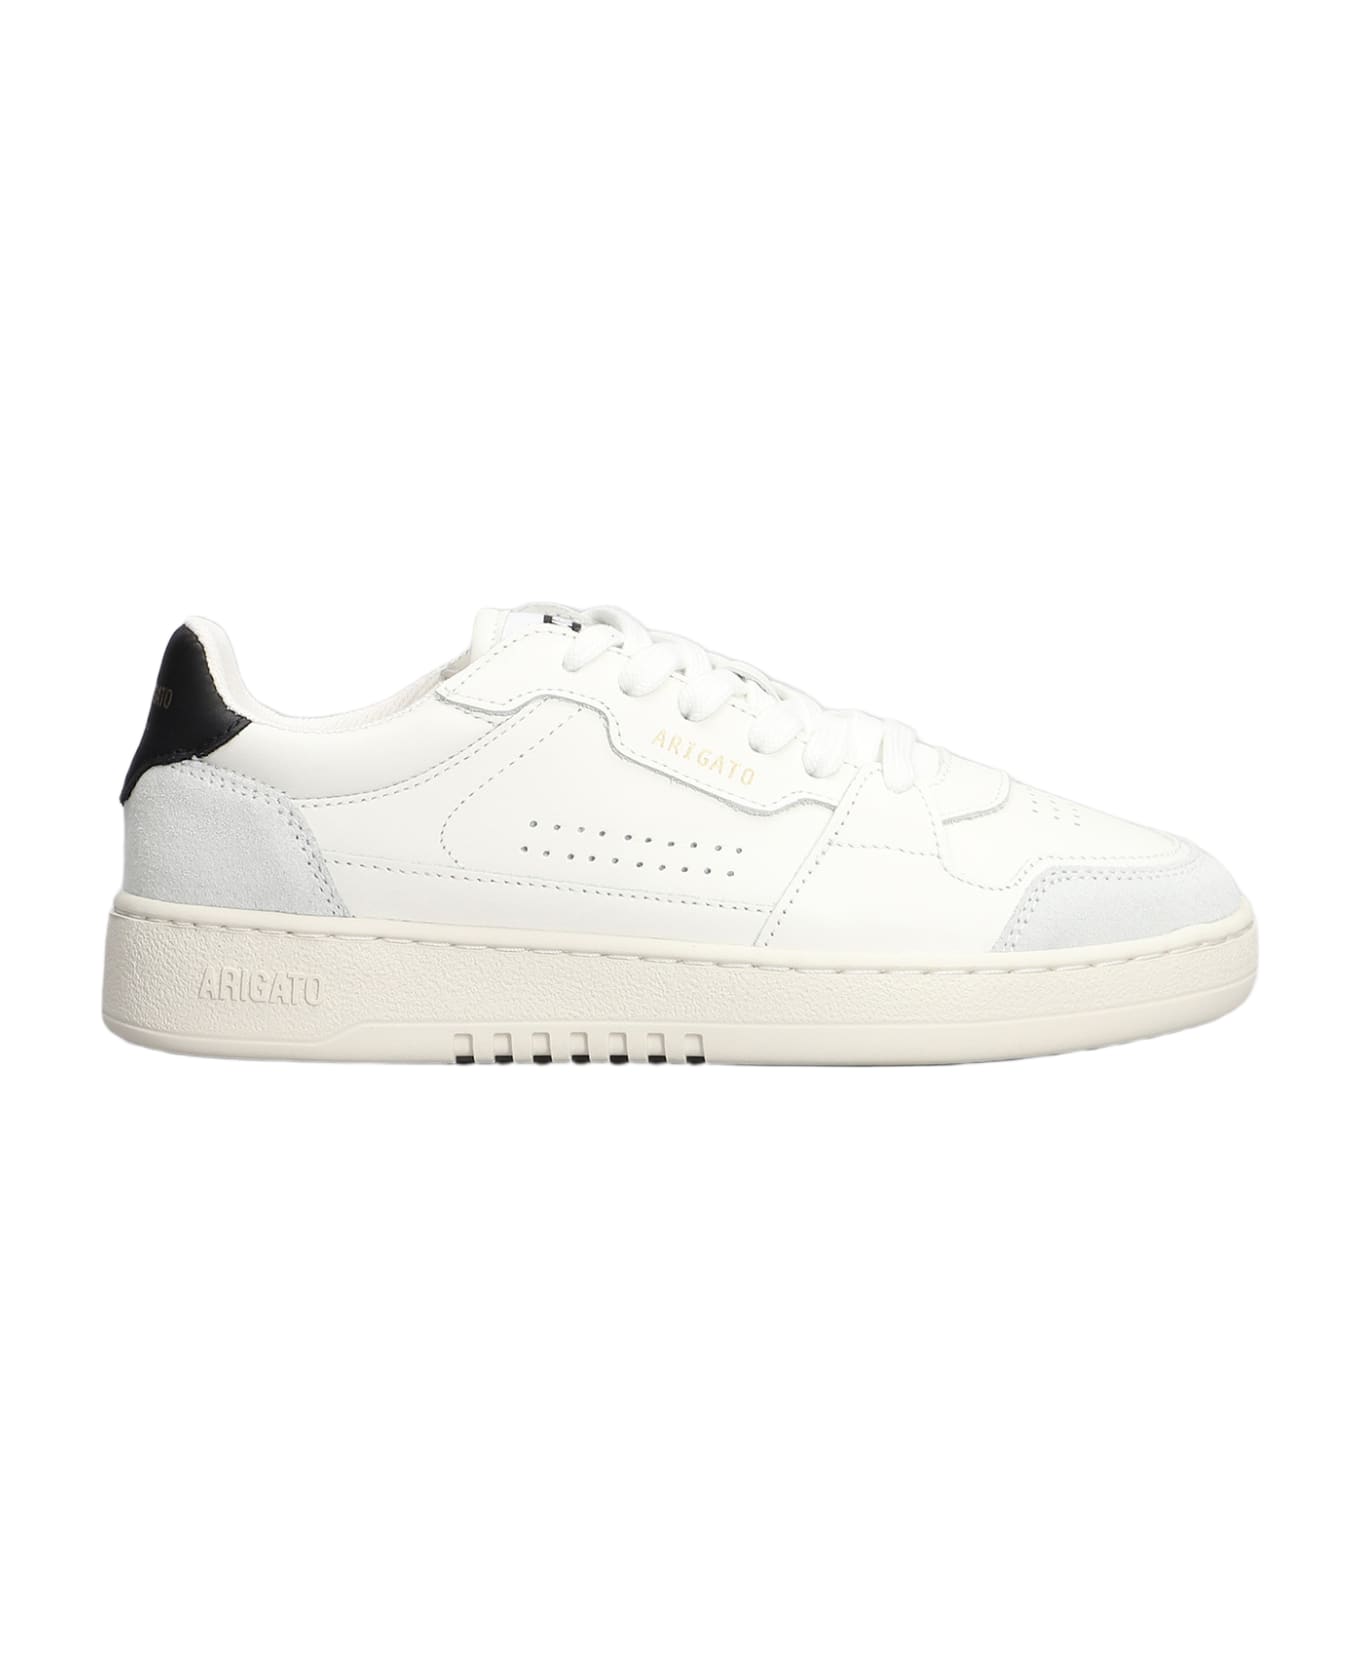 Axel Arigato Dice Lo Sneakers In White Suede And Leather - white スニーカー